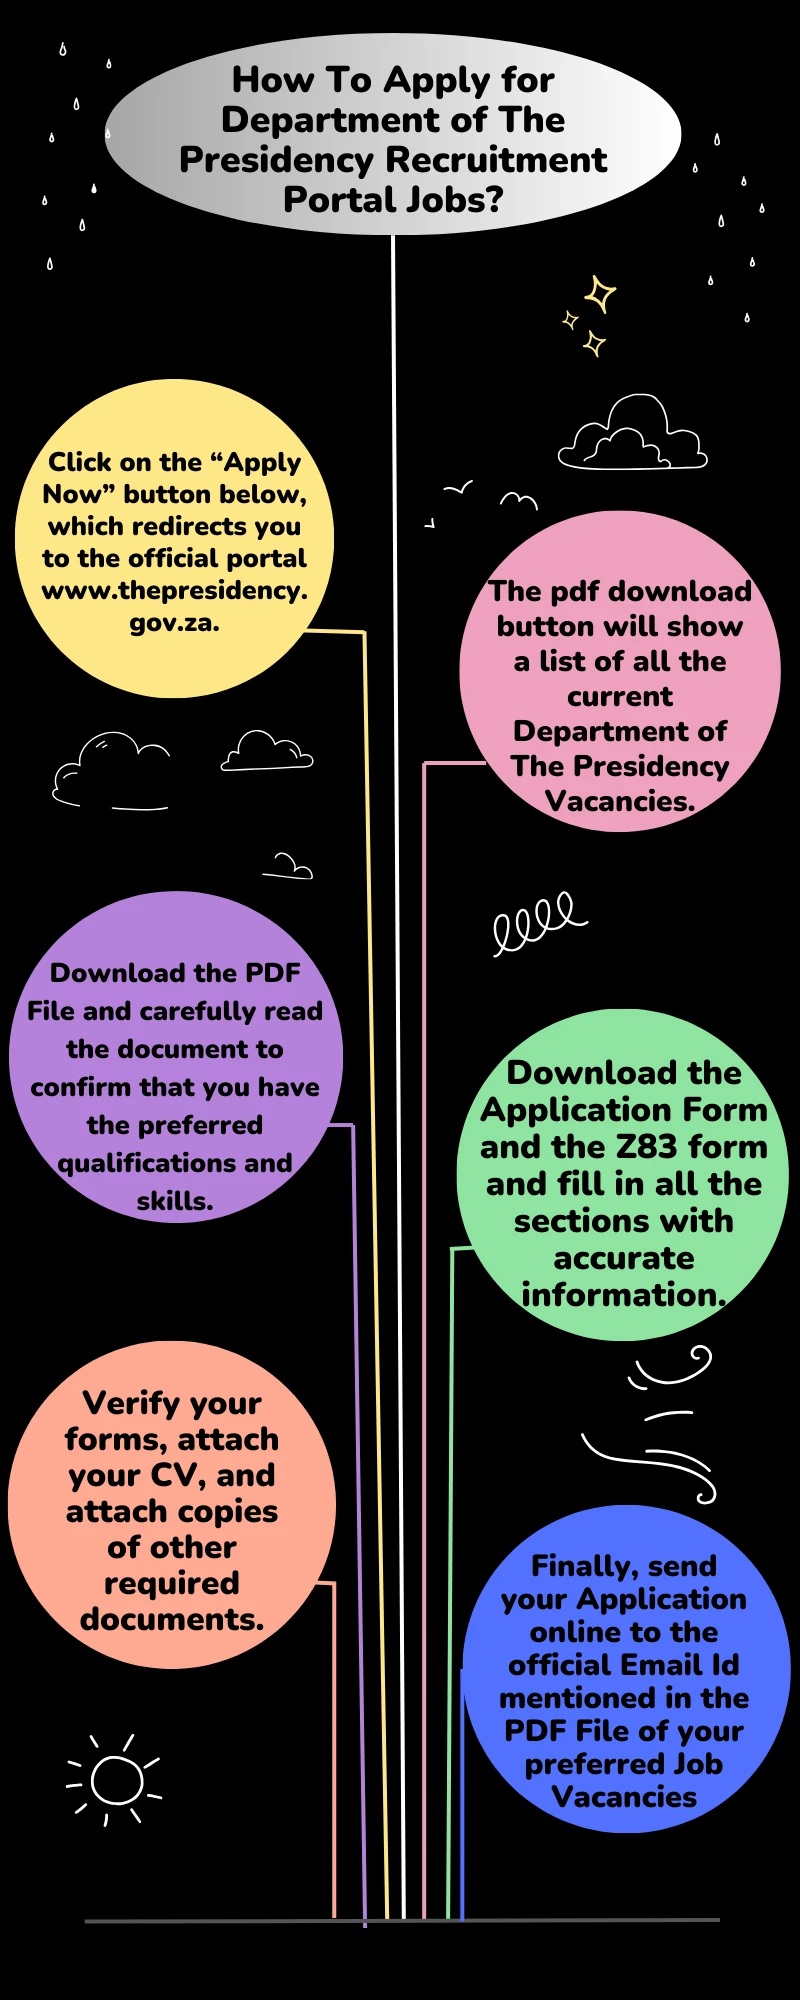 How To Apply for Department of The Presidency Recruitment Portal Jobs?